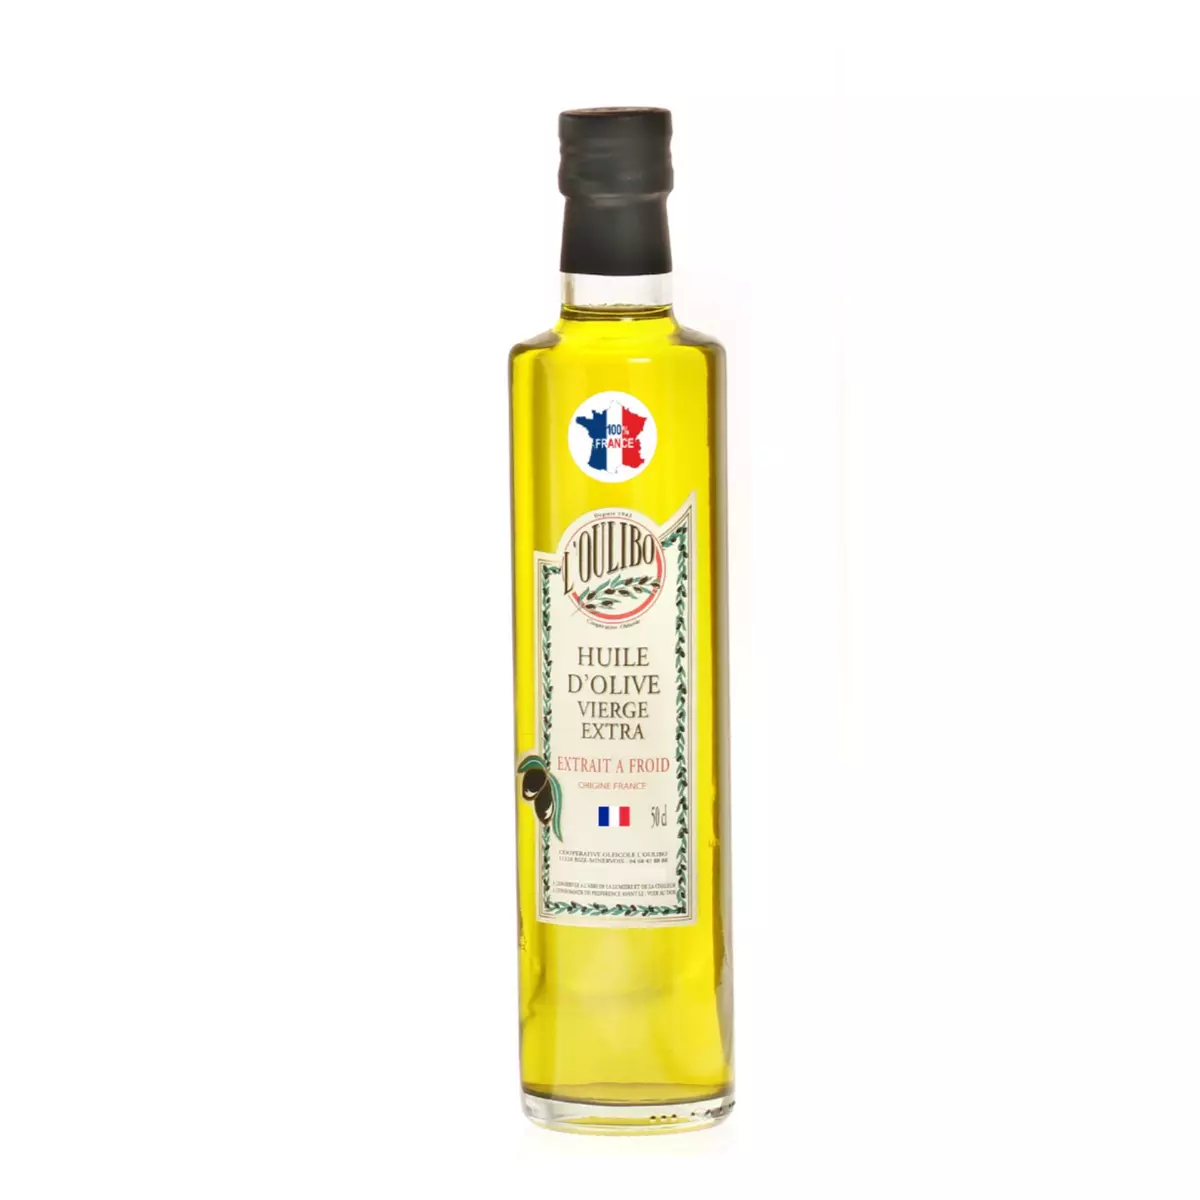 L'OULIBO Huile d'olive vierge extra 50cl